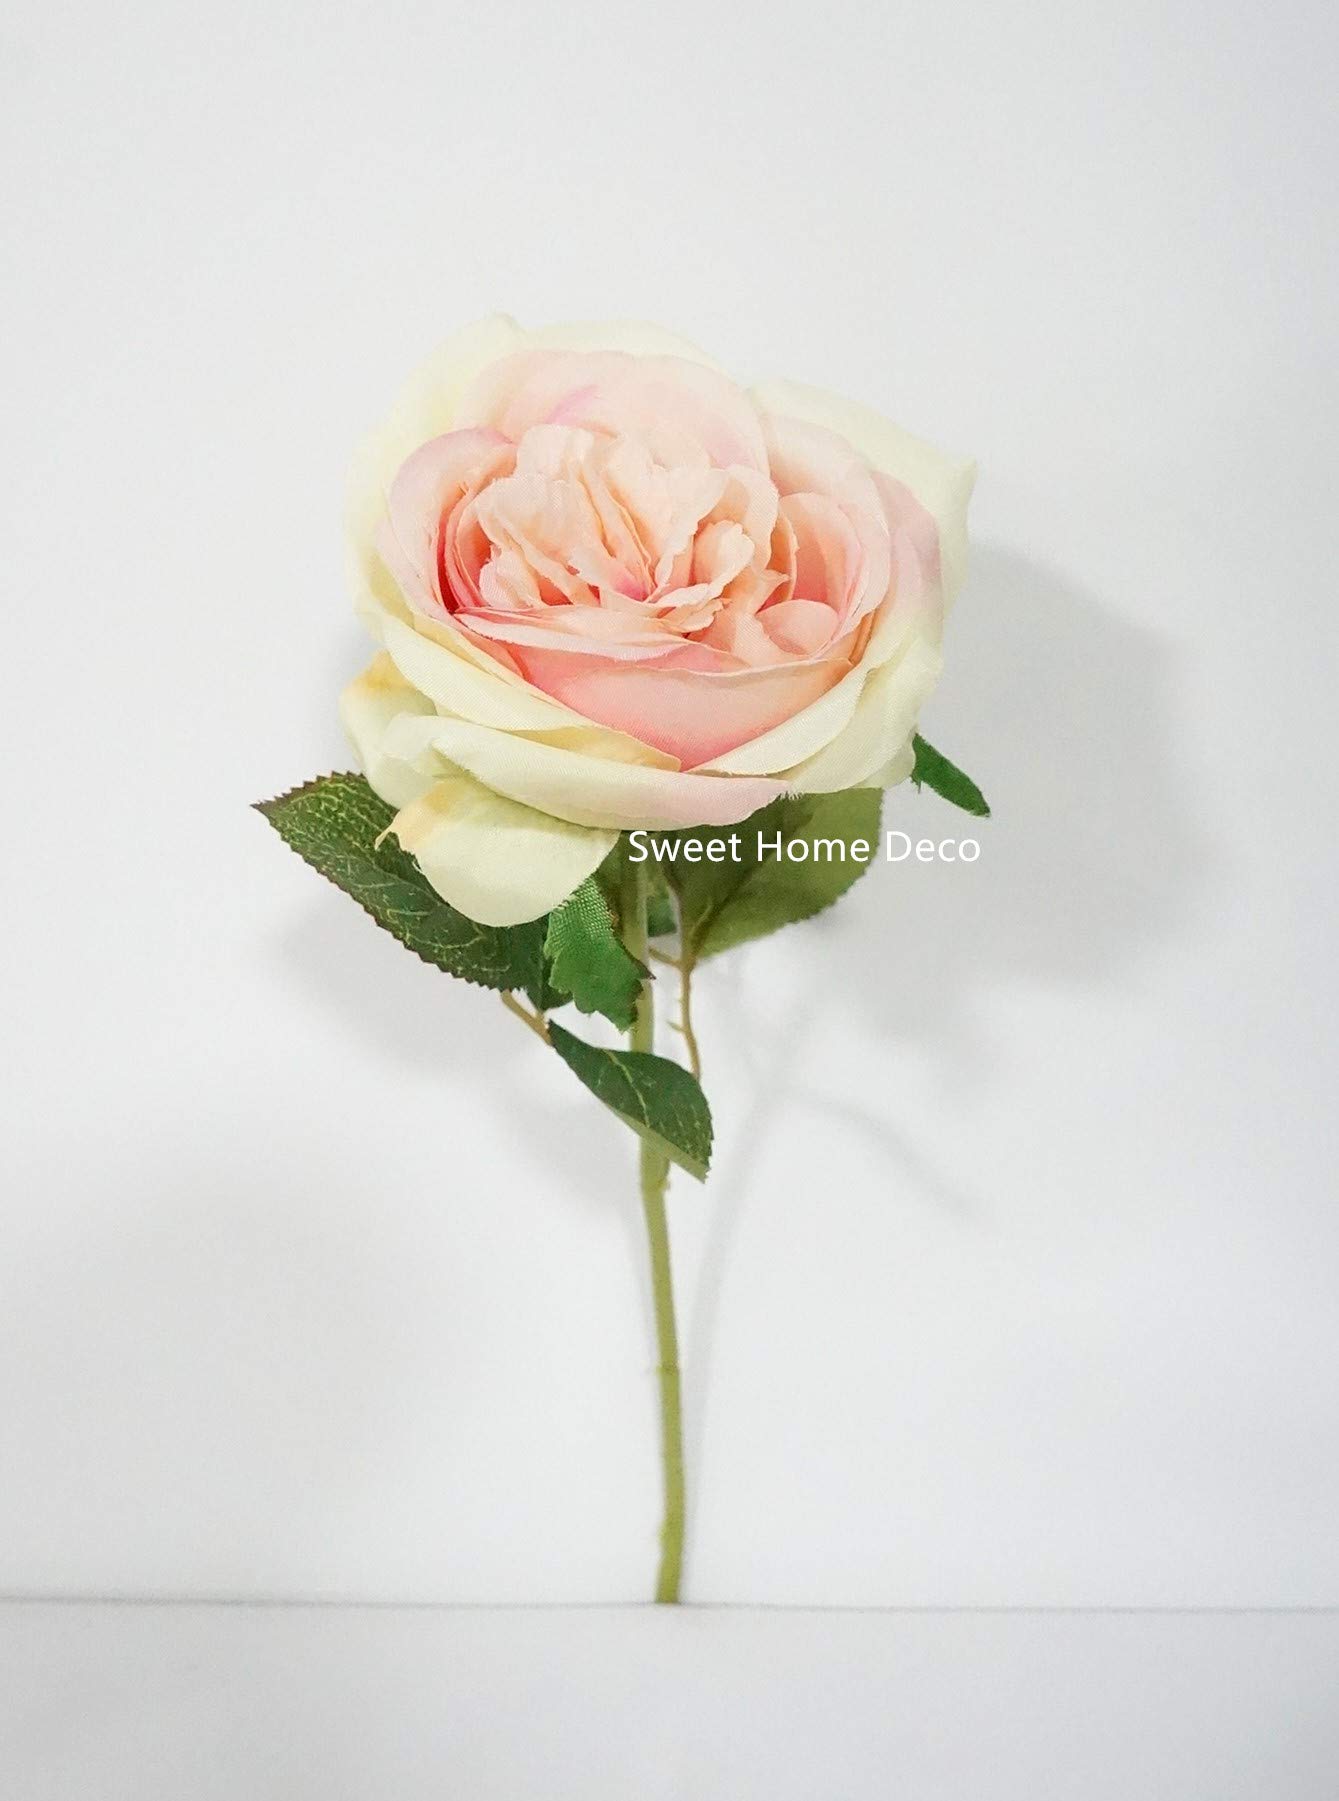 Sweet Home Deco, 15''Silk English Rose, Artificial Garden Rose, Single Rose, Spring Rose, Realistic Rose, Wedding/Home/Party Decoration Rose (Pink x 3 Stems)